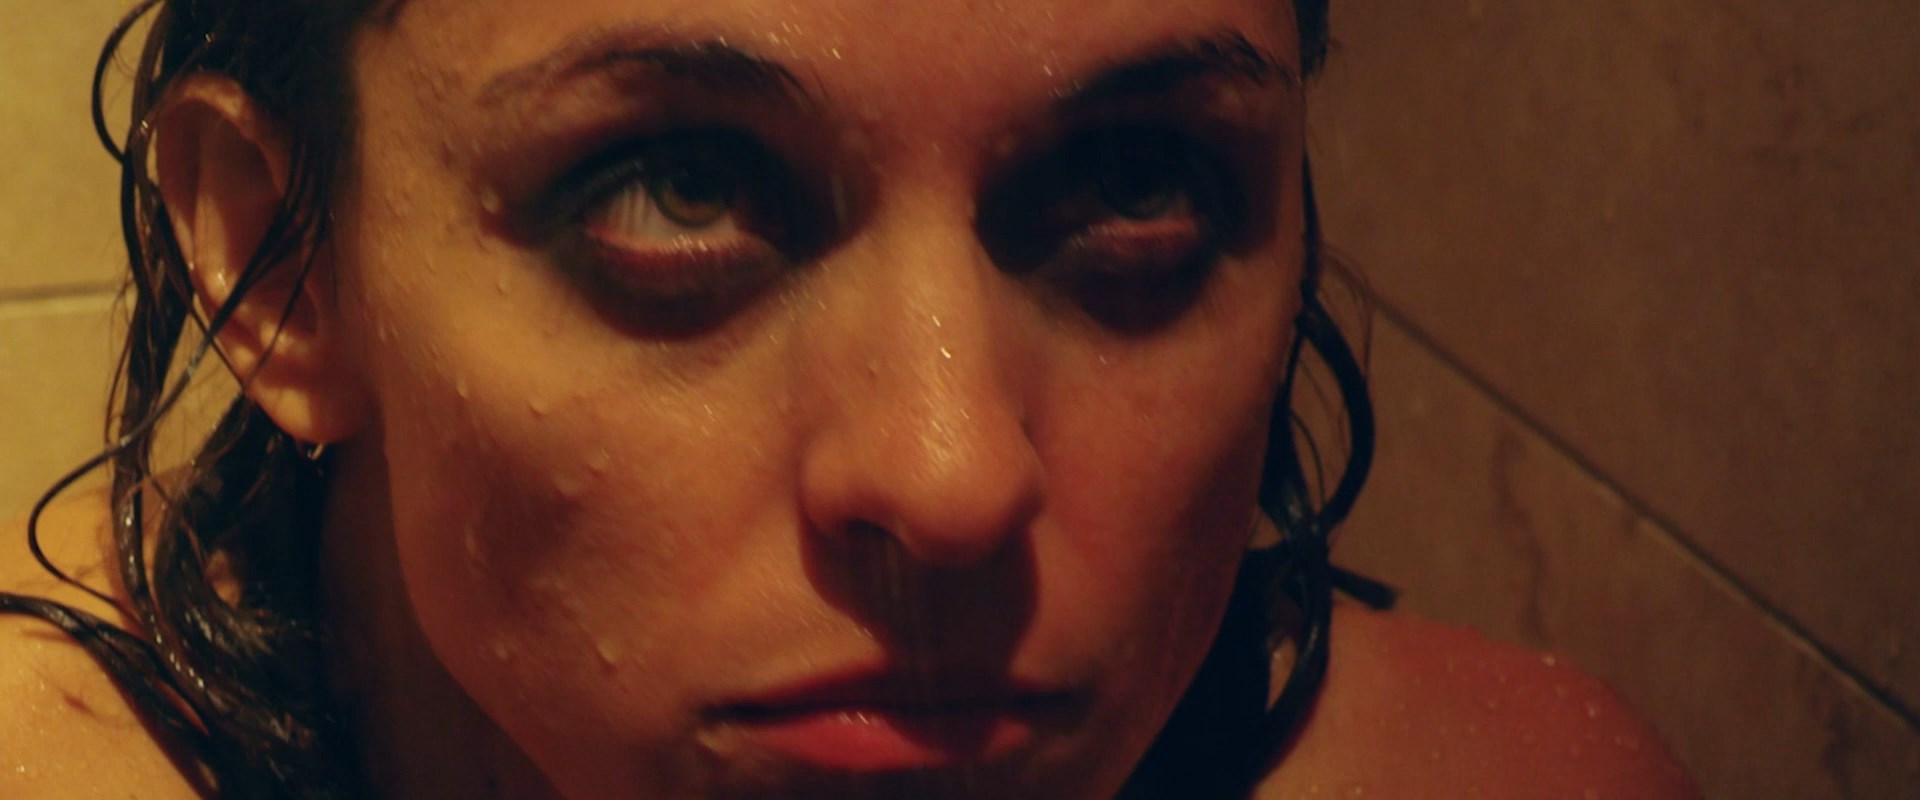 Youlika Skafida is in the shower topless and bloodied.